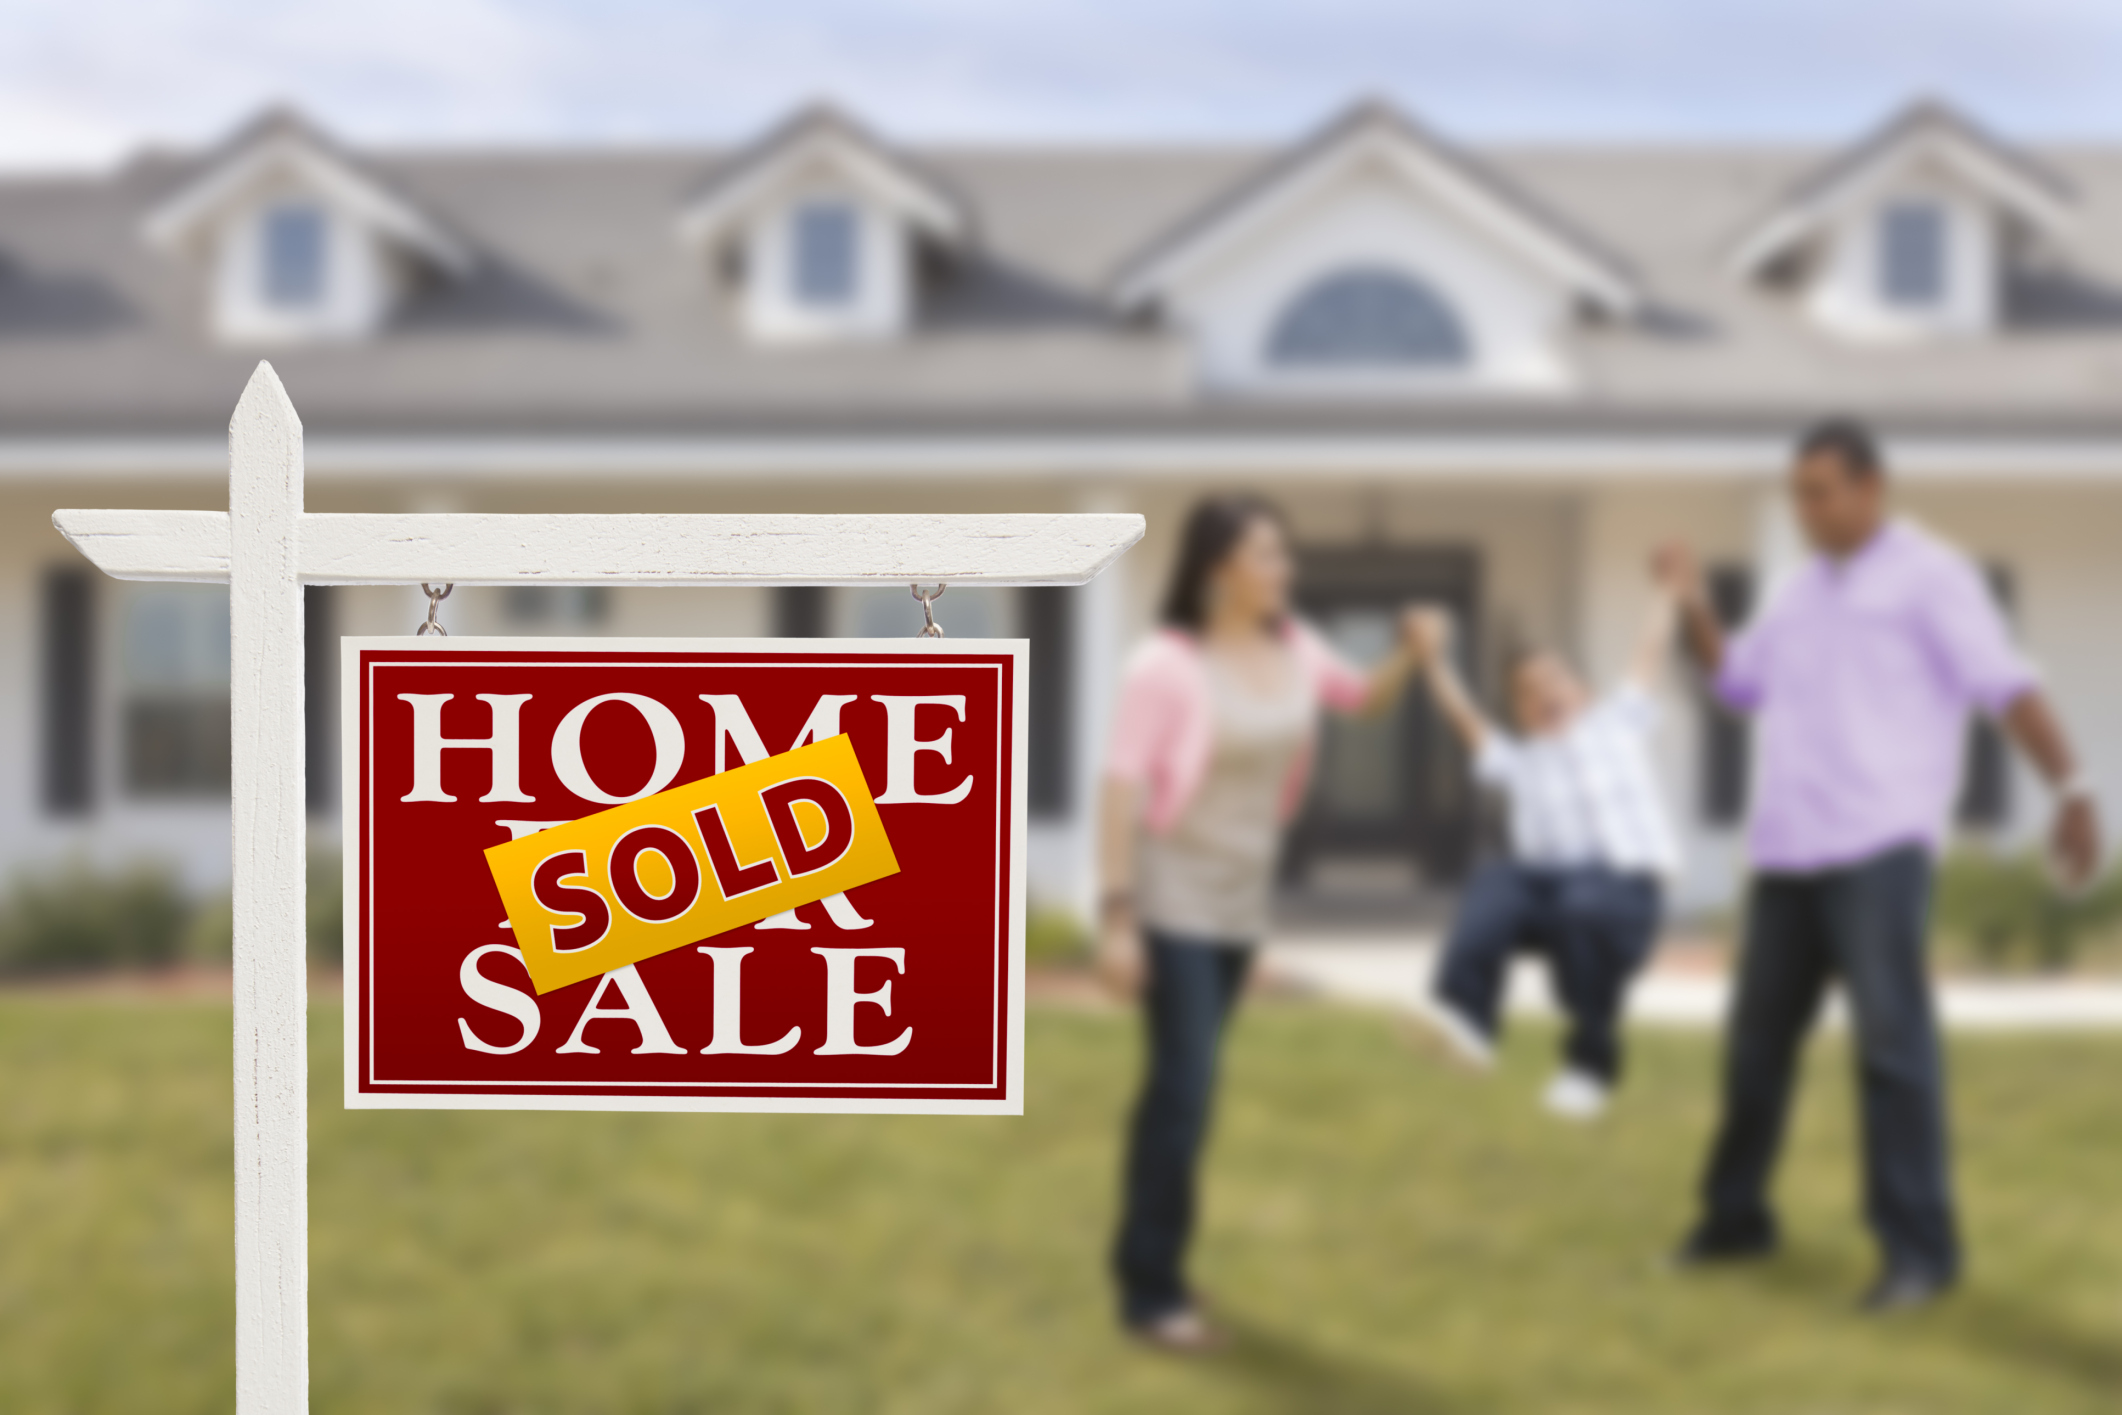 With SellYourHomeFastOnline.com, you will receive a fair, contingency-free, cash offer for your home with a quick closing date.